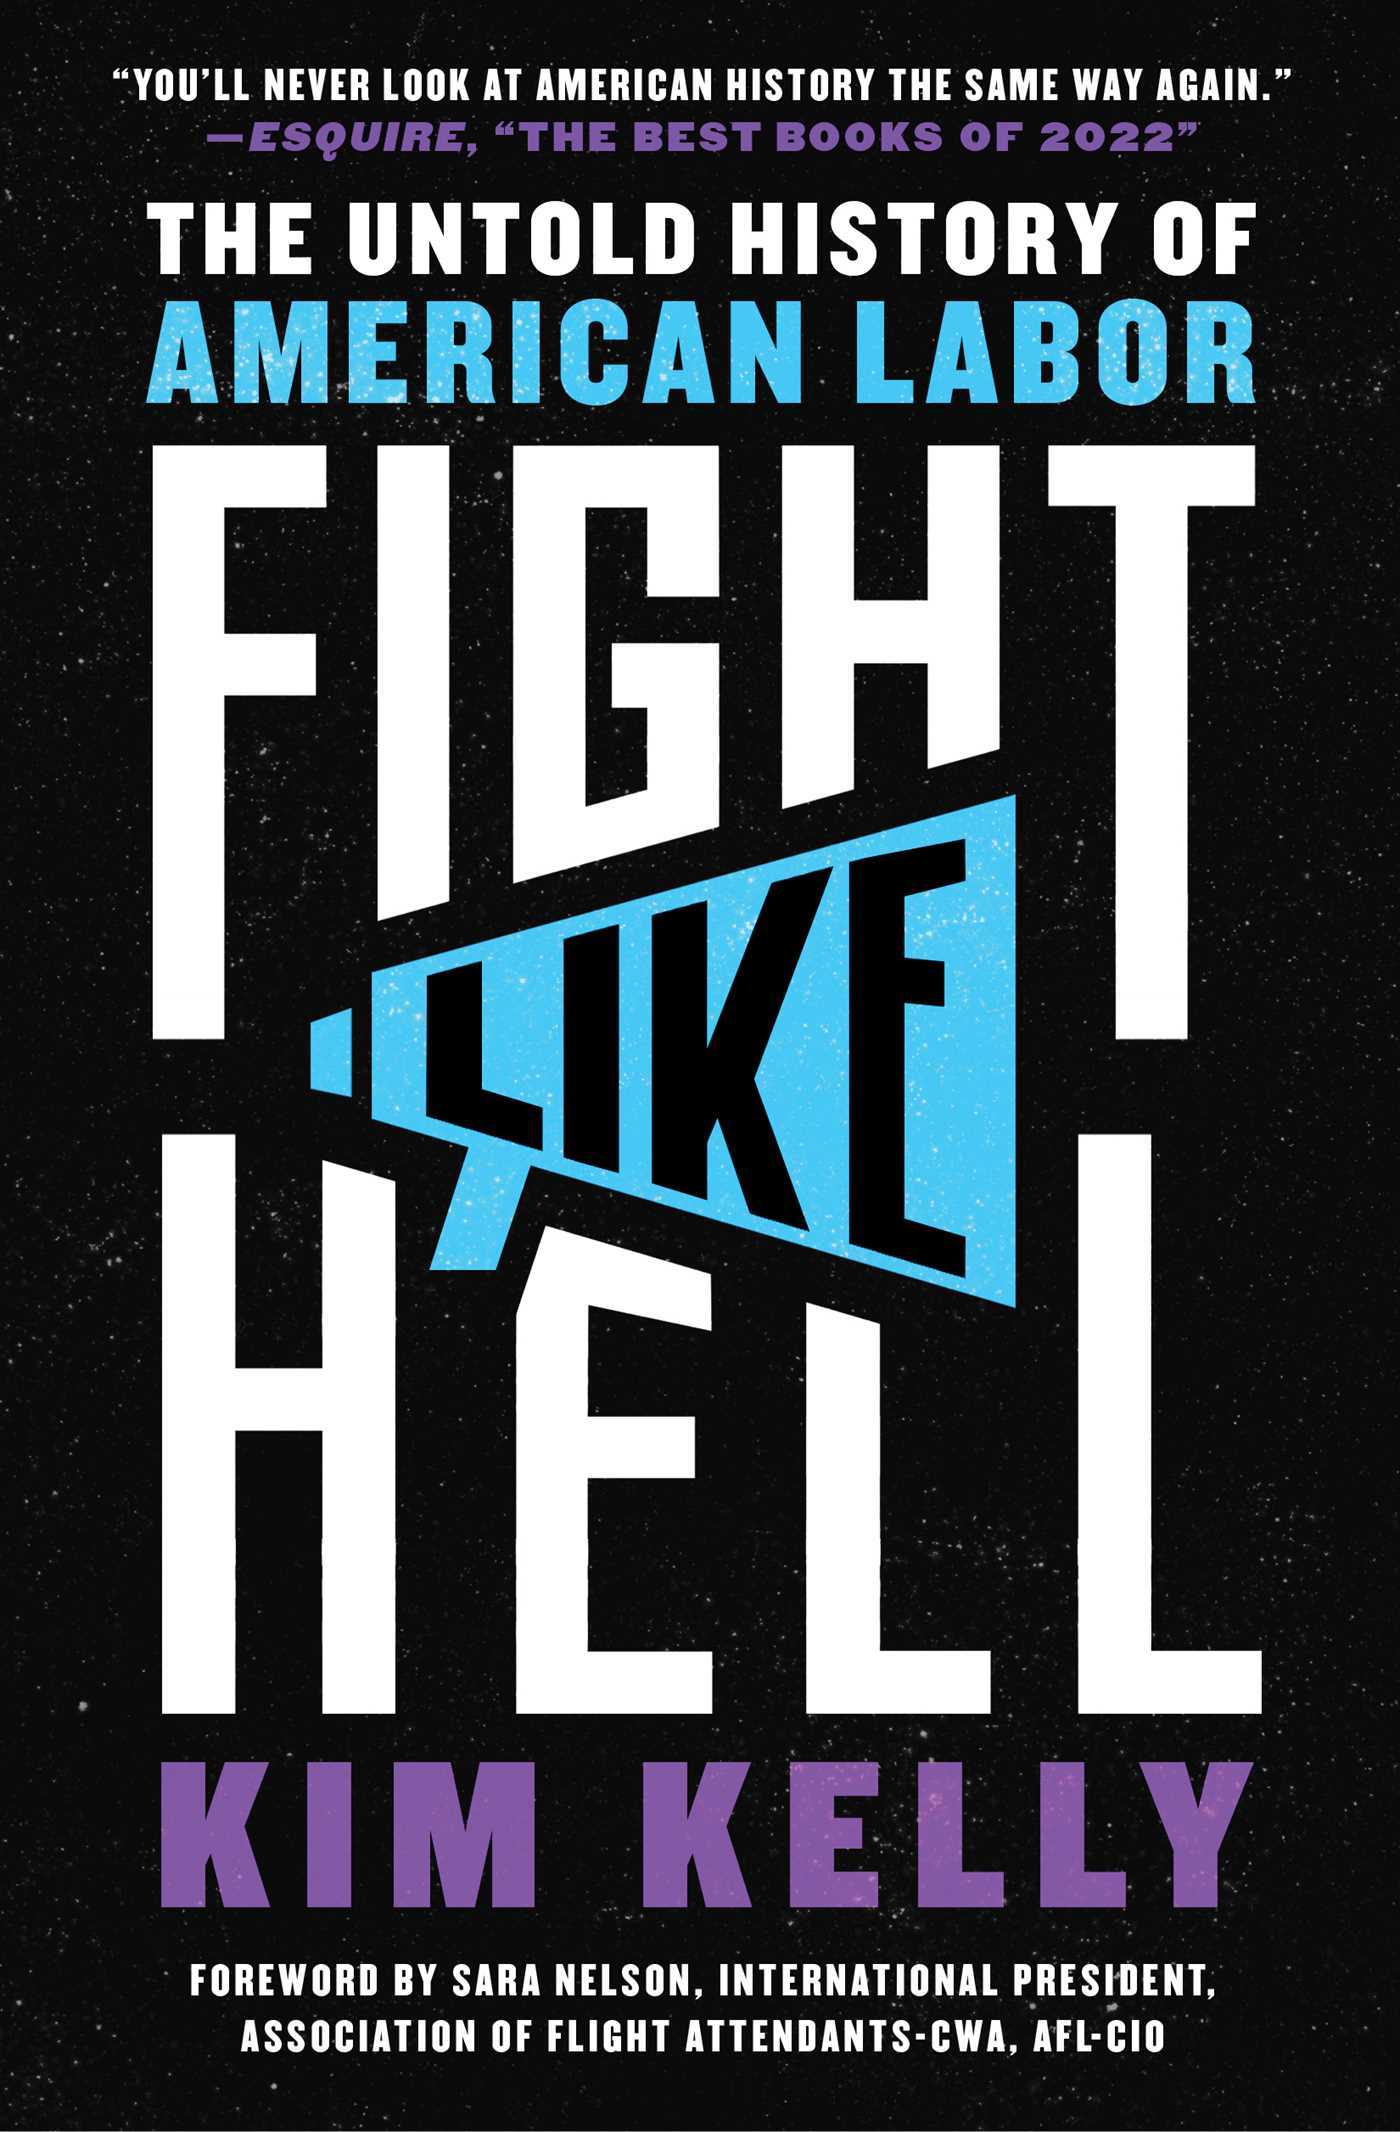 Fight Like Hell: The Untold History of American Labor by Kim Kelly